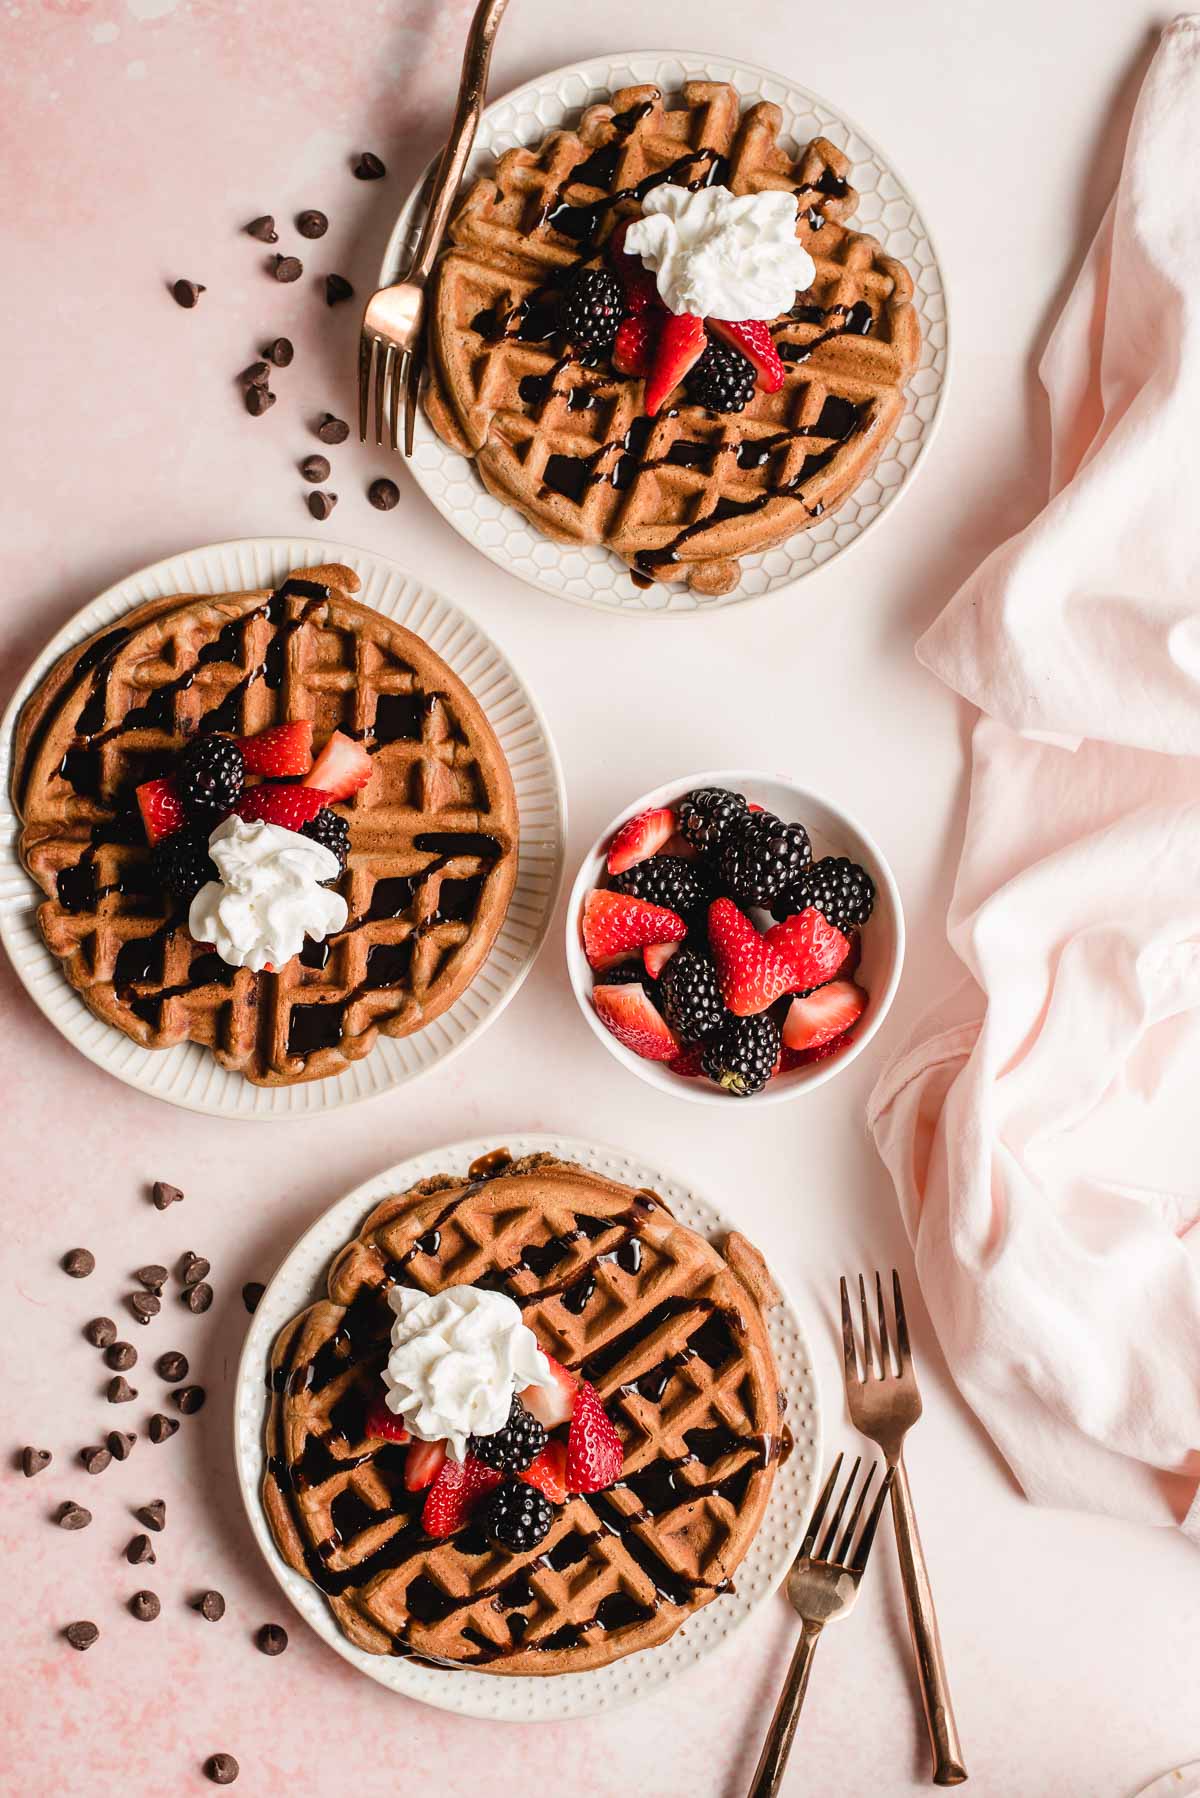 Three white plates each holding a waffle with chocolate, berries, and whipped cream, on a pink background with chocolate chips scattered throughout.